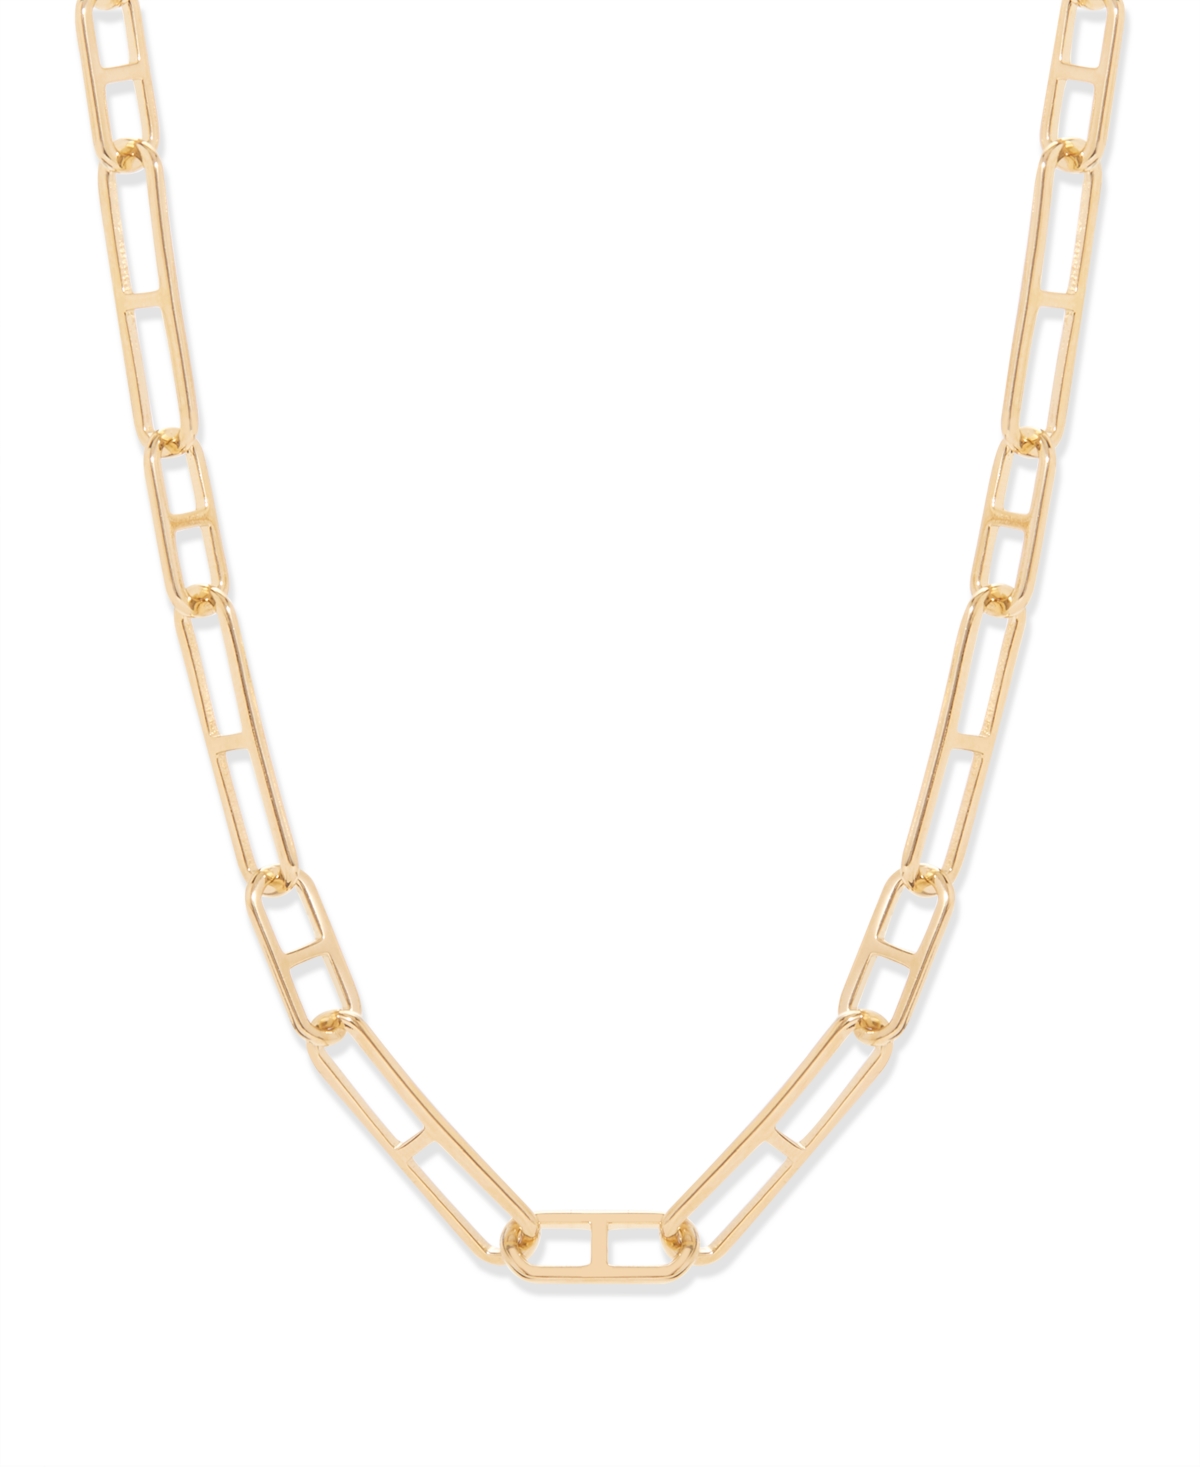 Brook & York 14k Gold-plated Finnley Chain Necklace